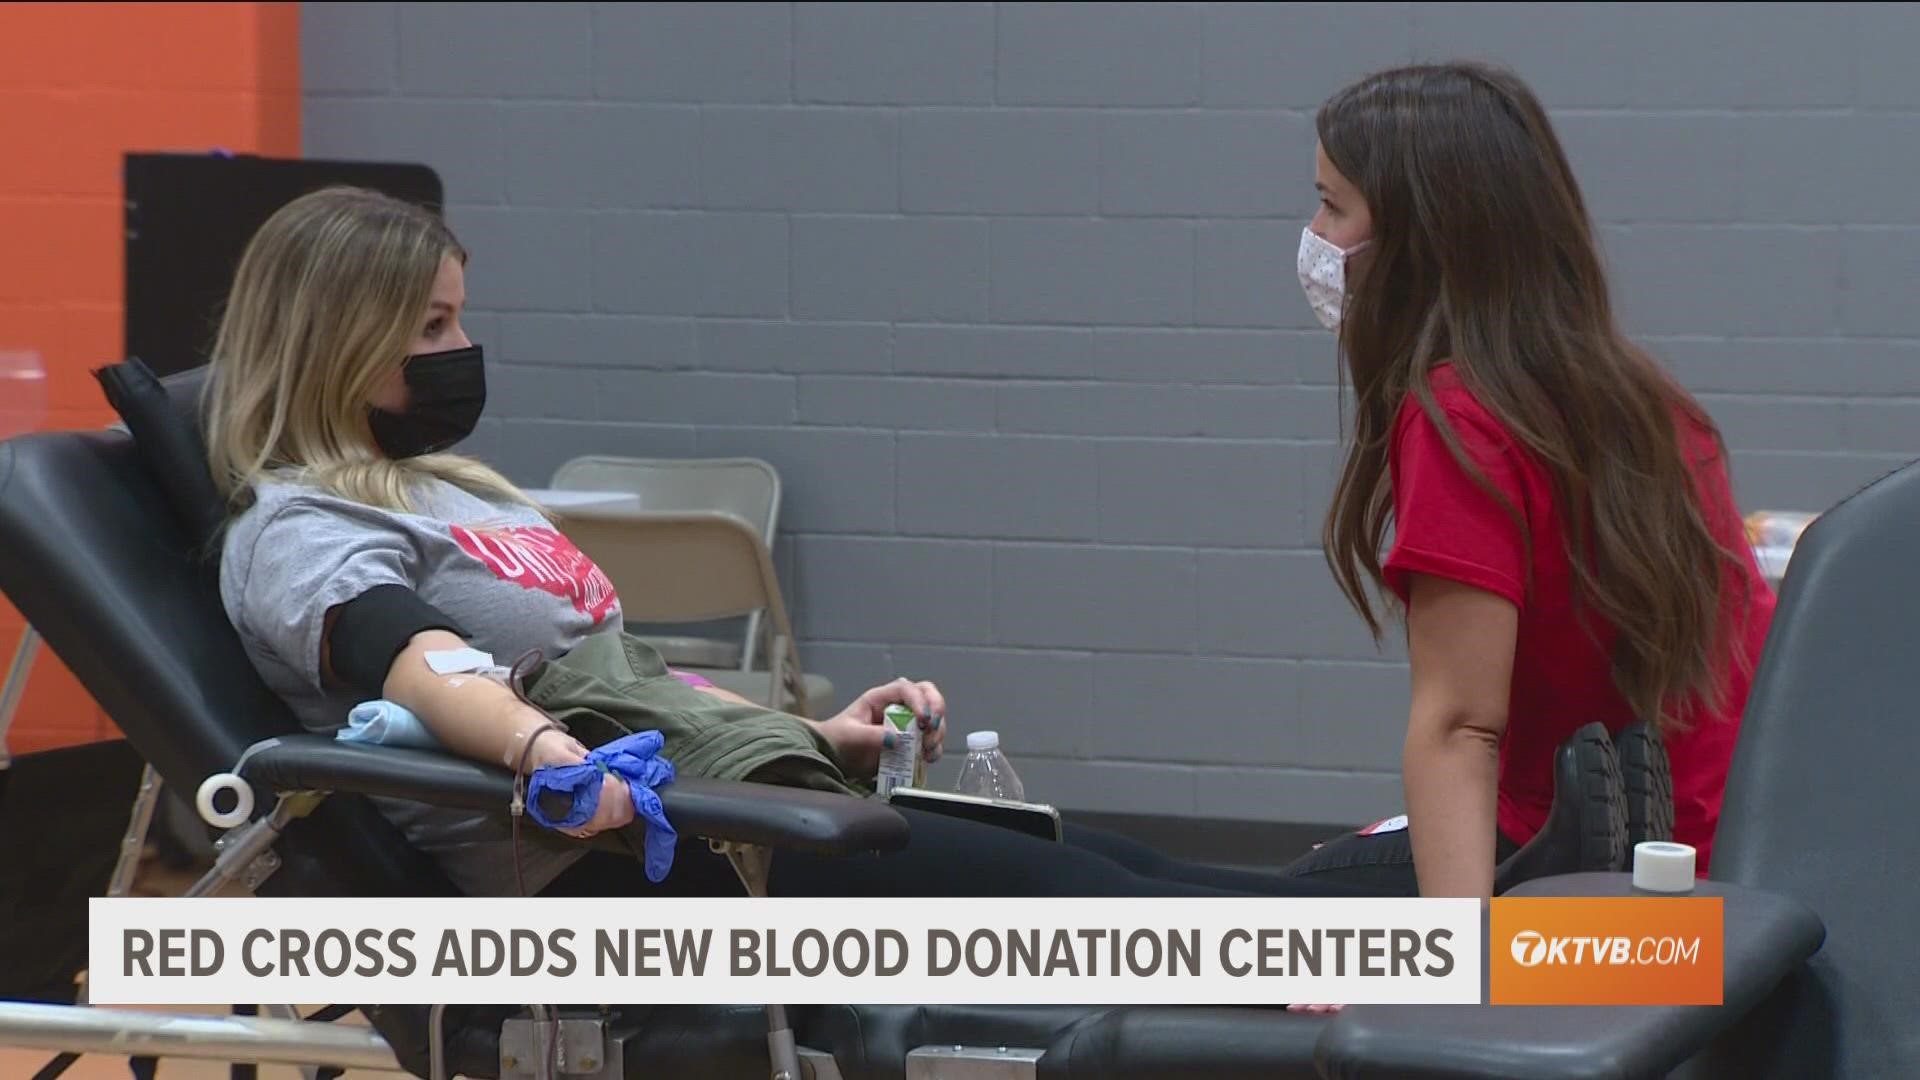 The two new facilities will be in Nampa and Twin Falls. The Red Cross of Idaho said it collects close to 70,000 units of blood from more than 2,000 drives each year.